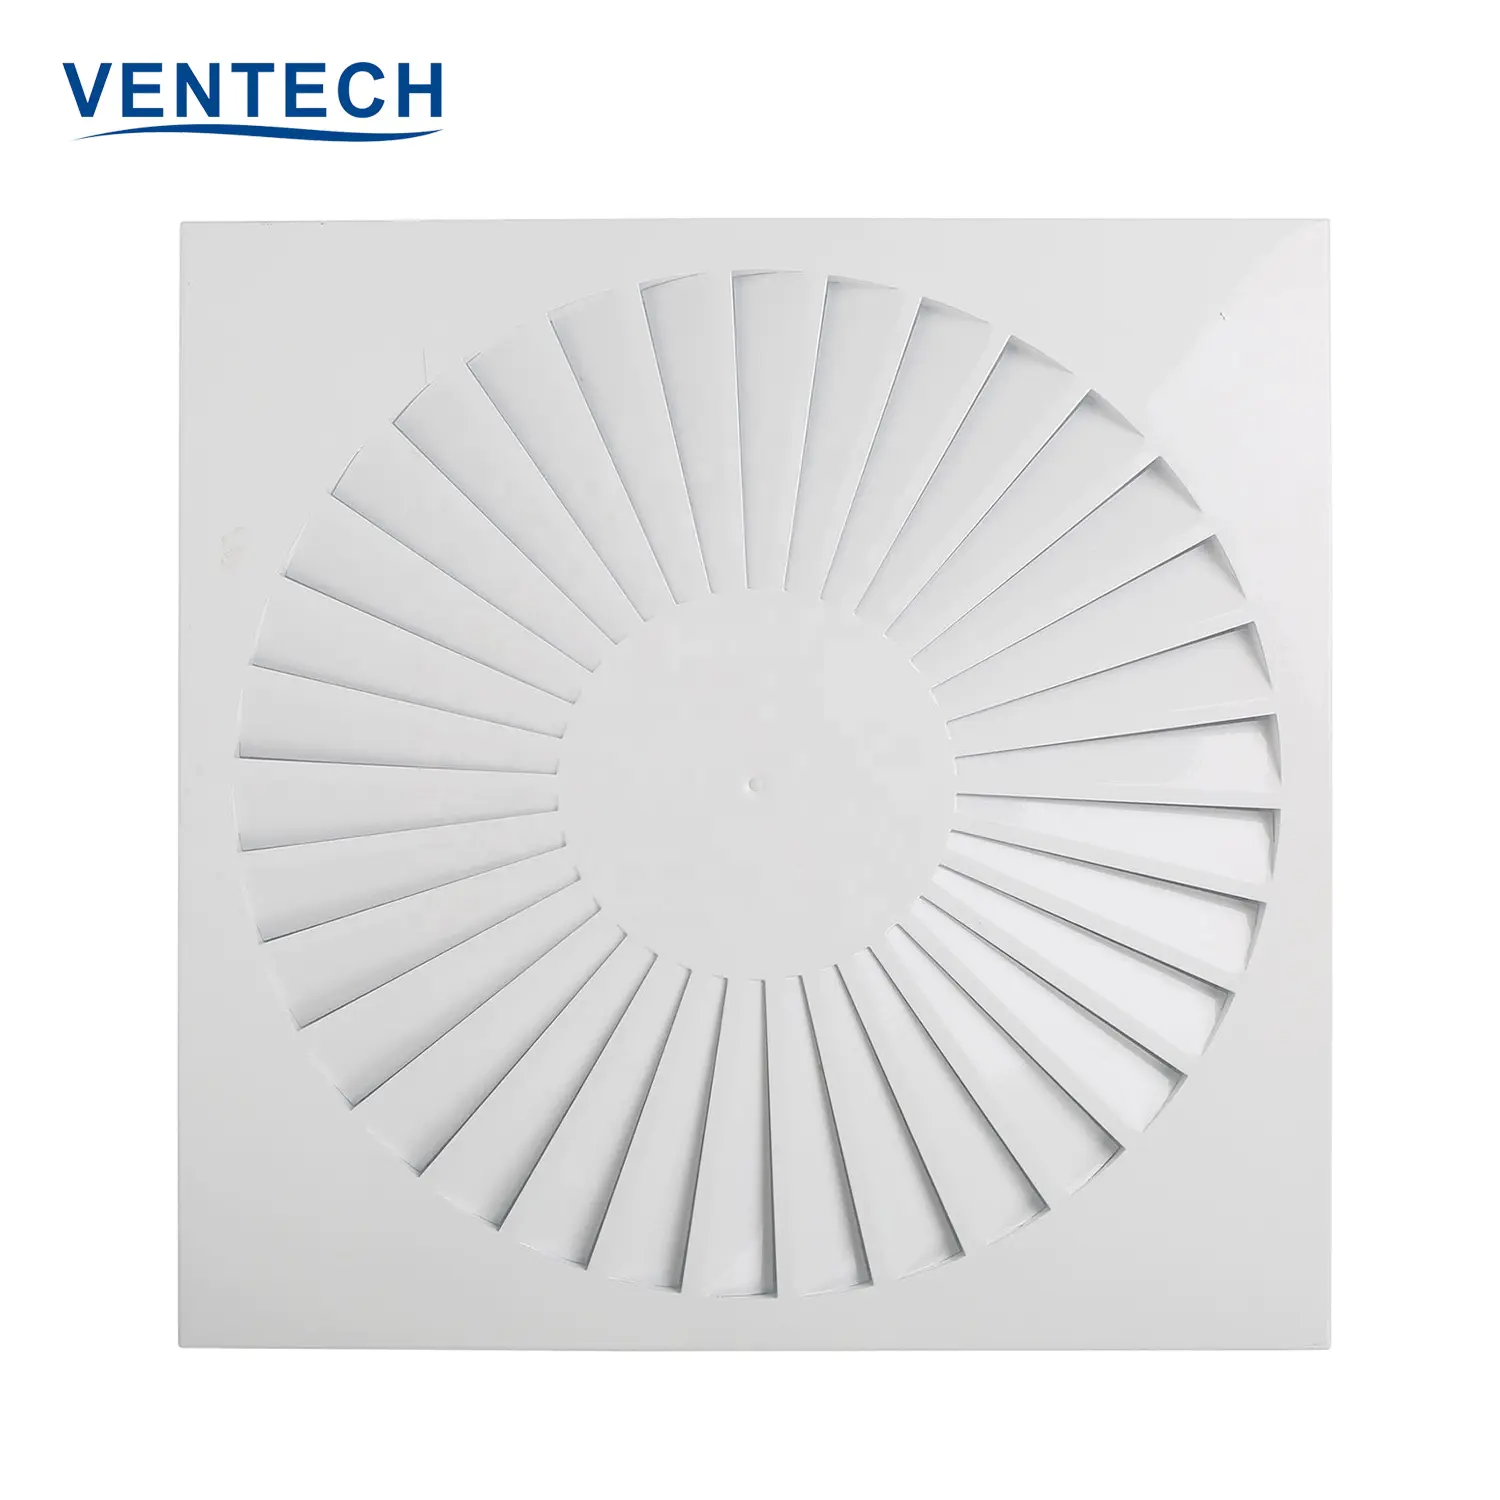 Hvac systems fixed blades square swirl diffuser air vent cover